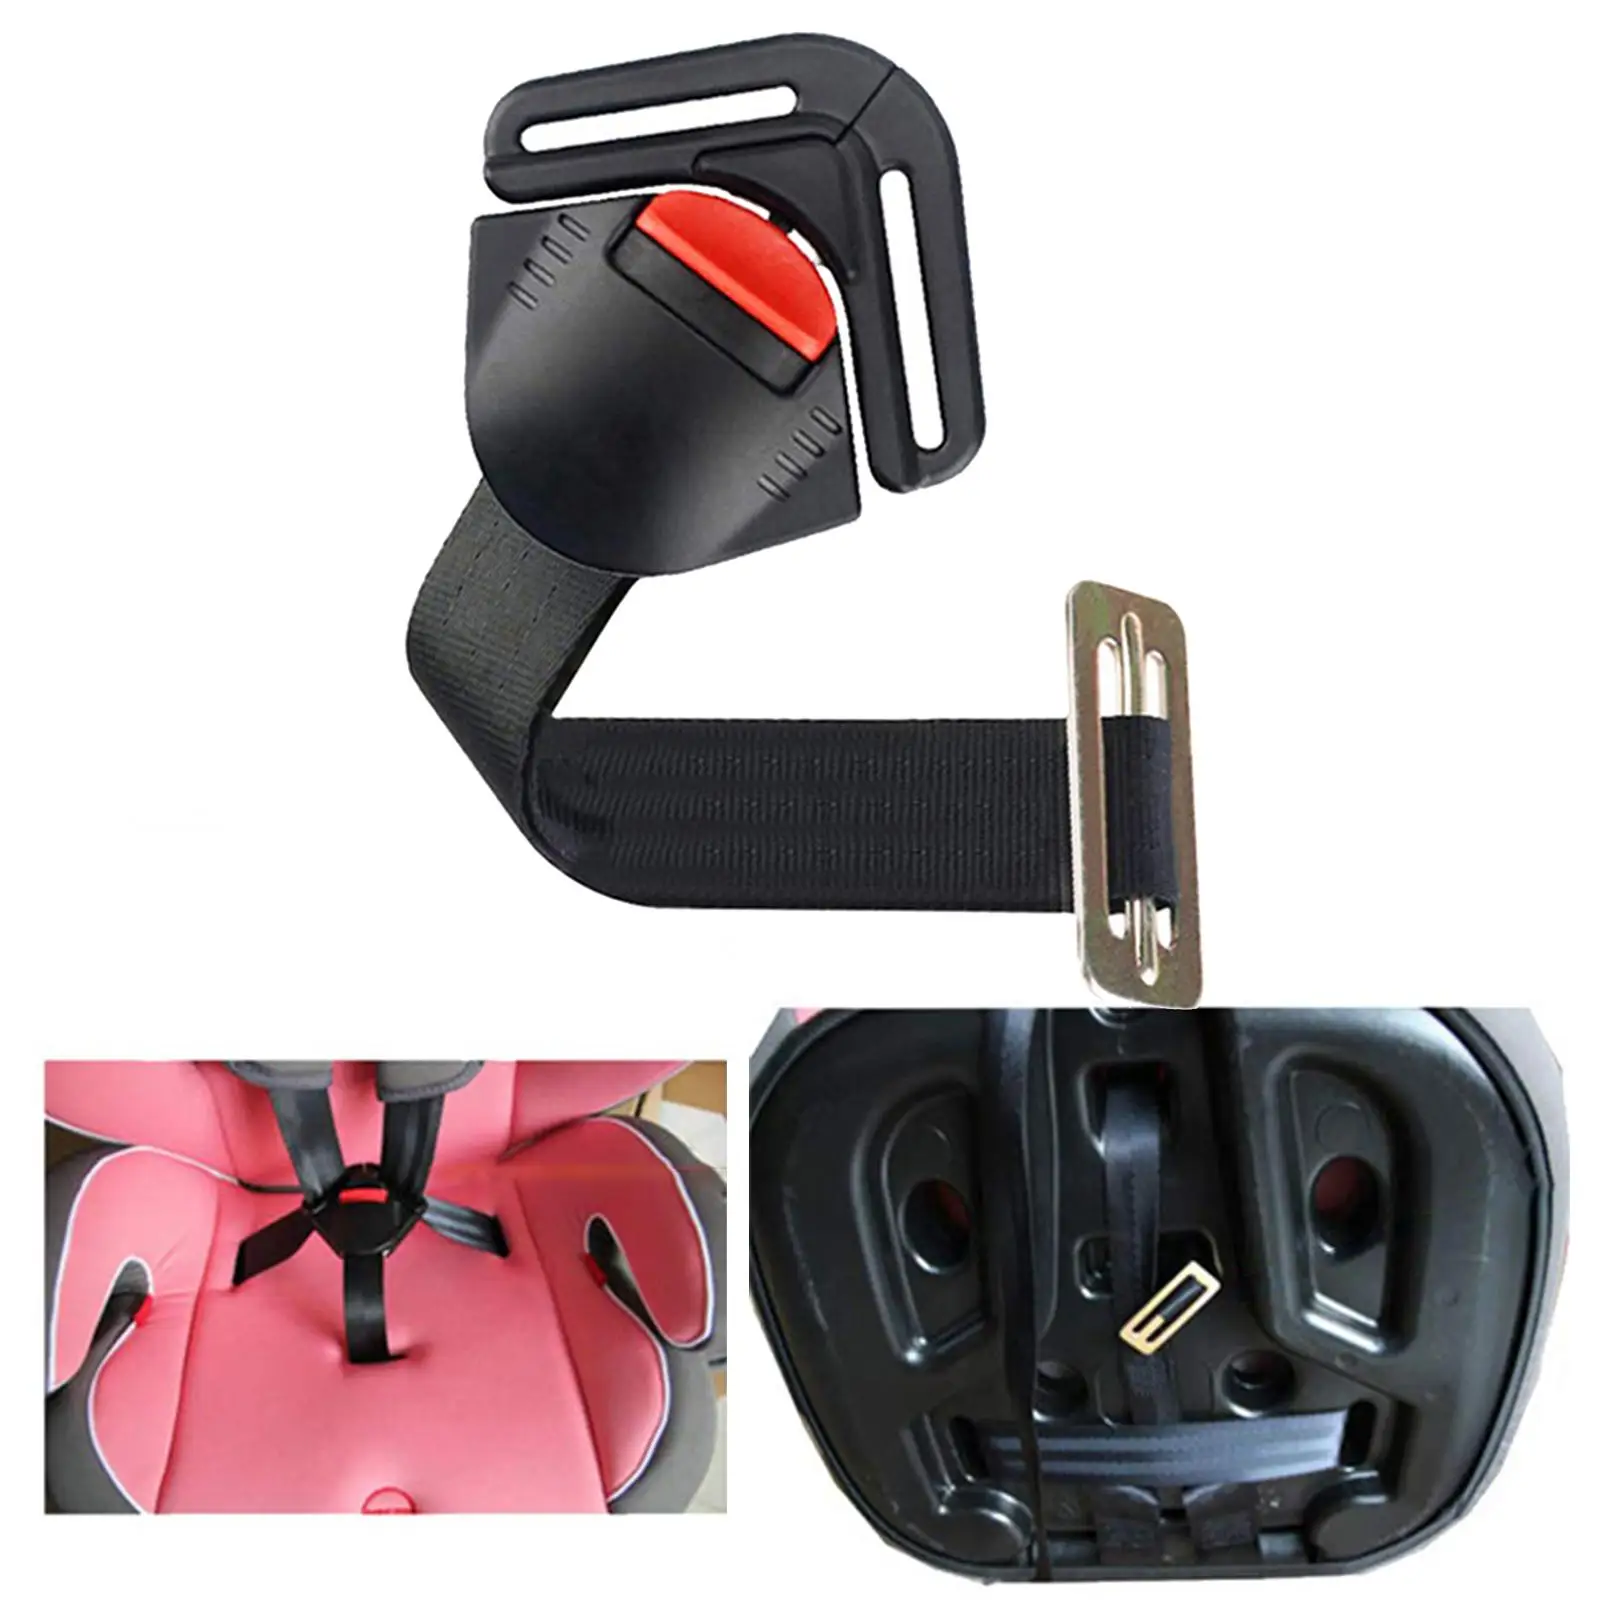 Car Child Seat Safety Belt Buckle 5 Point Locking Buckle Clip Toddler Harness Clip Fixed Lock Buckle for Pushchair Stroller